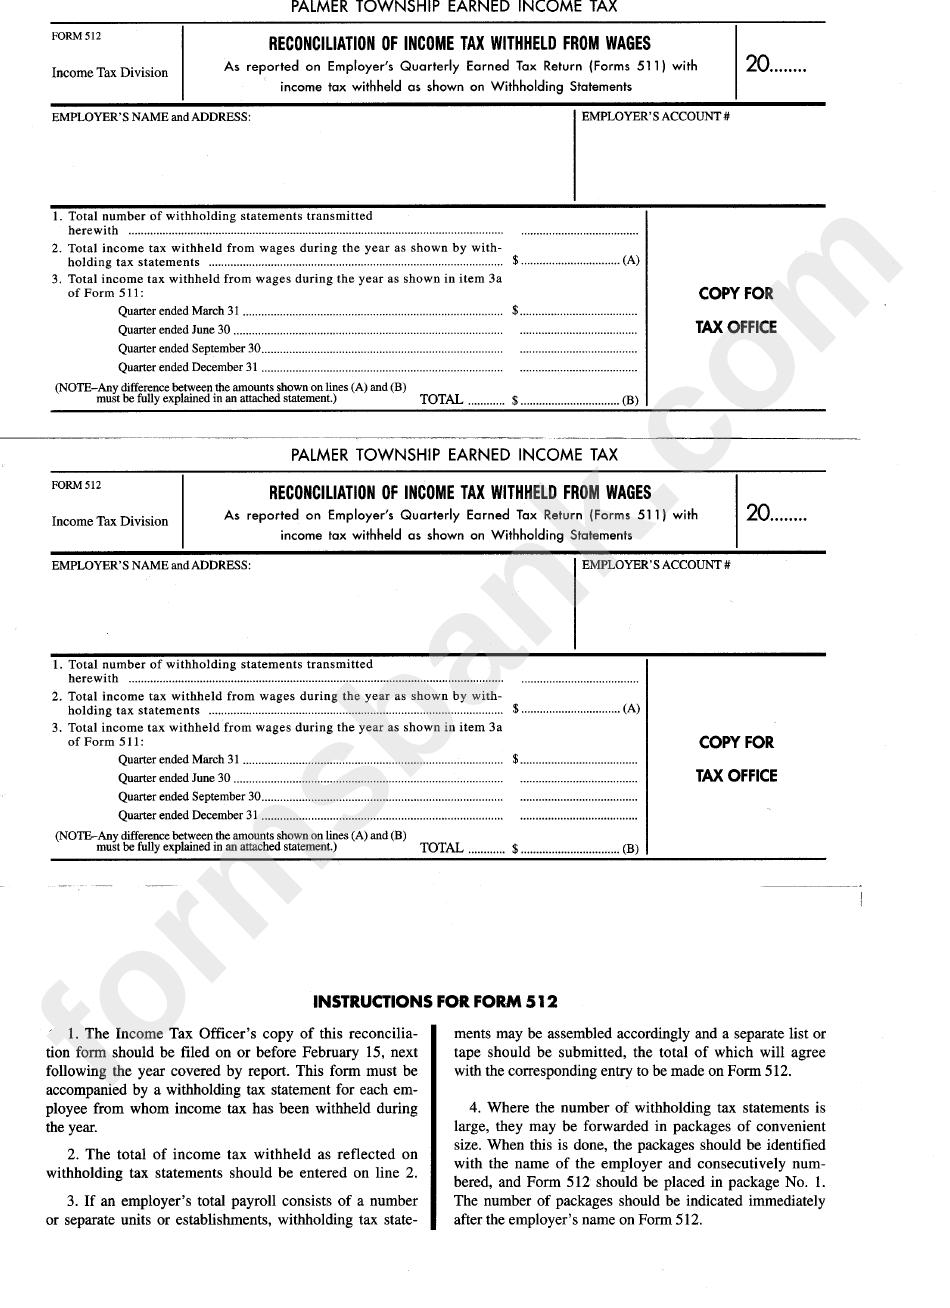 Form 512 - Reconciliation Of Income Tax Withheld From Wages - Palmer Township